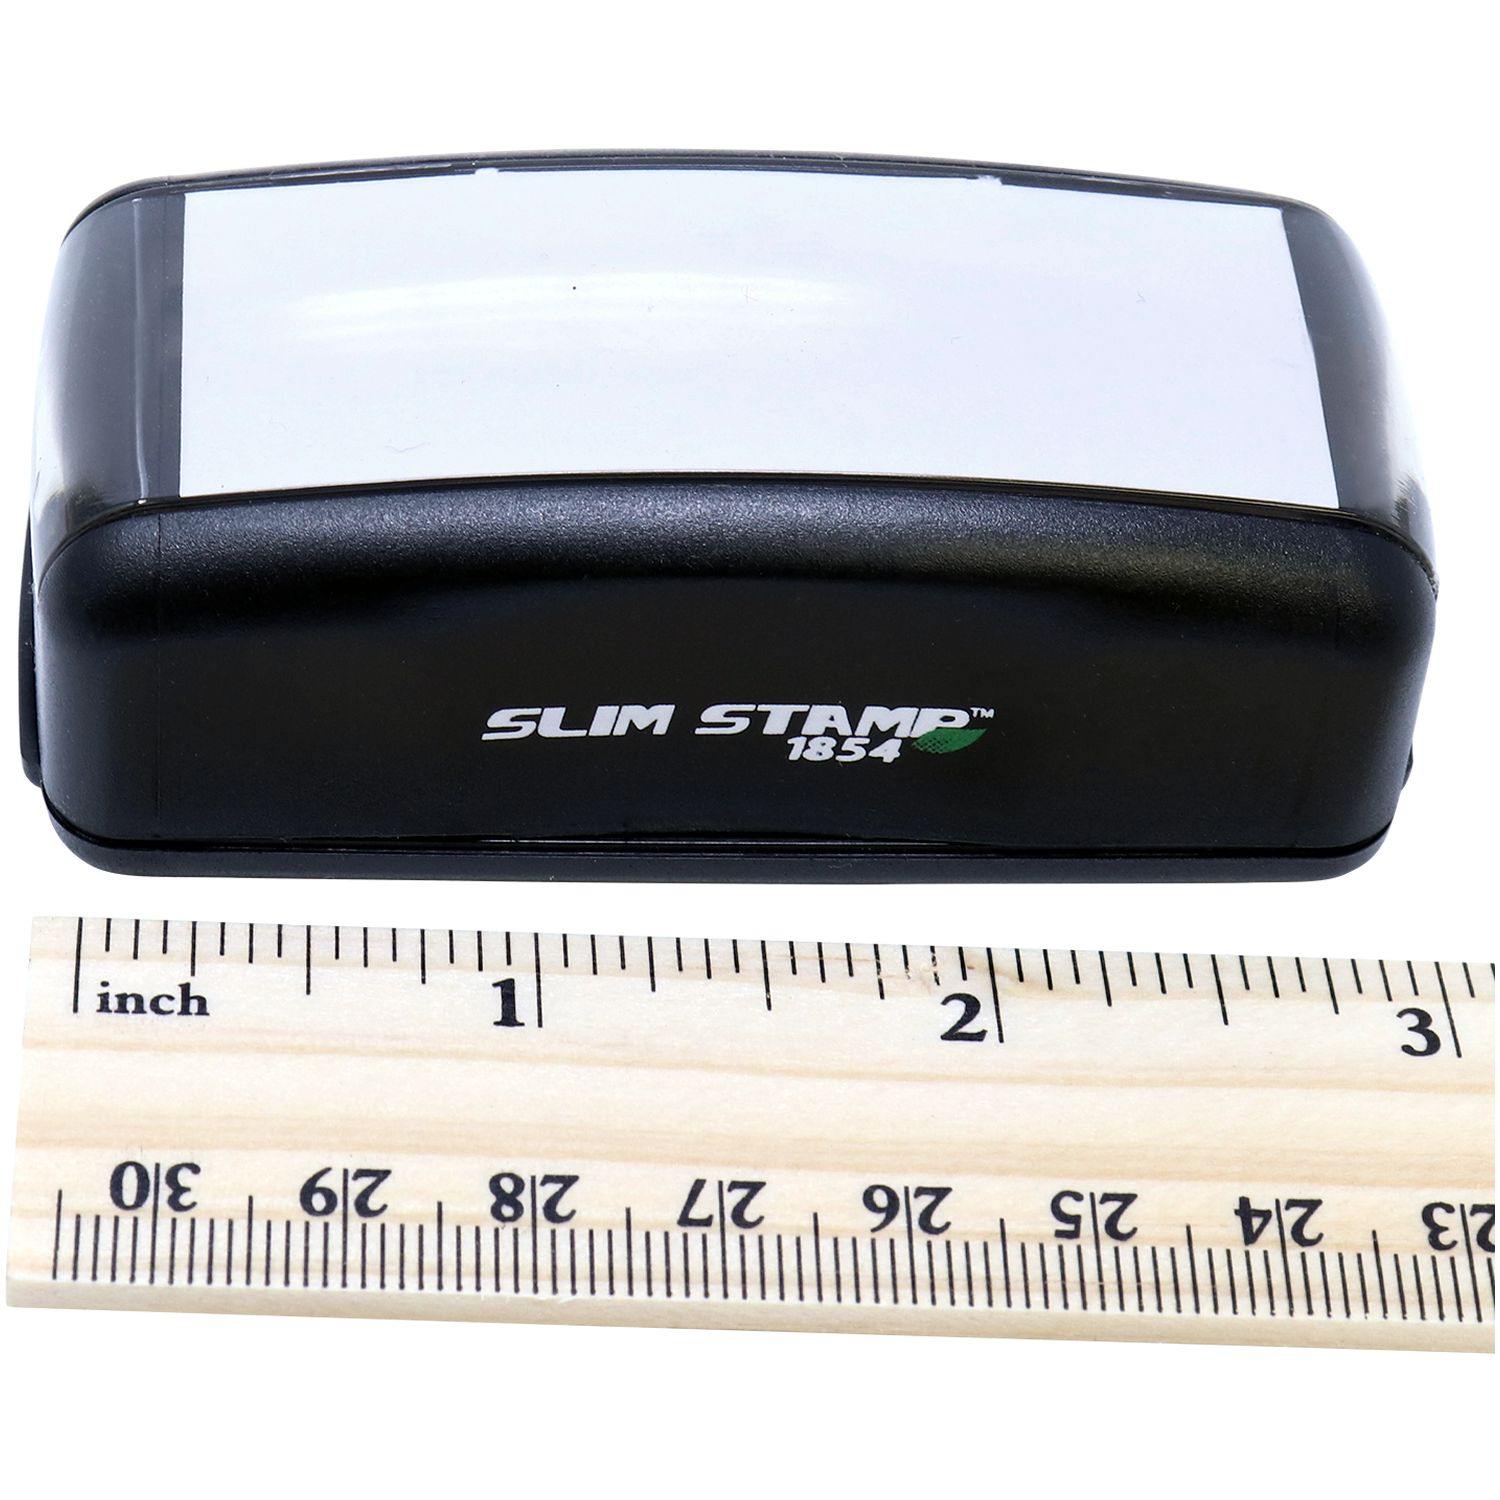 Measurement Large Pre-Inked Aviso Stamp with Ruler